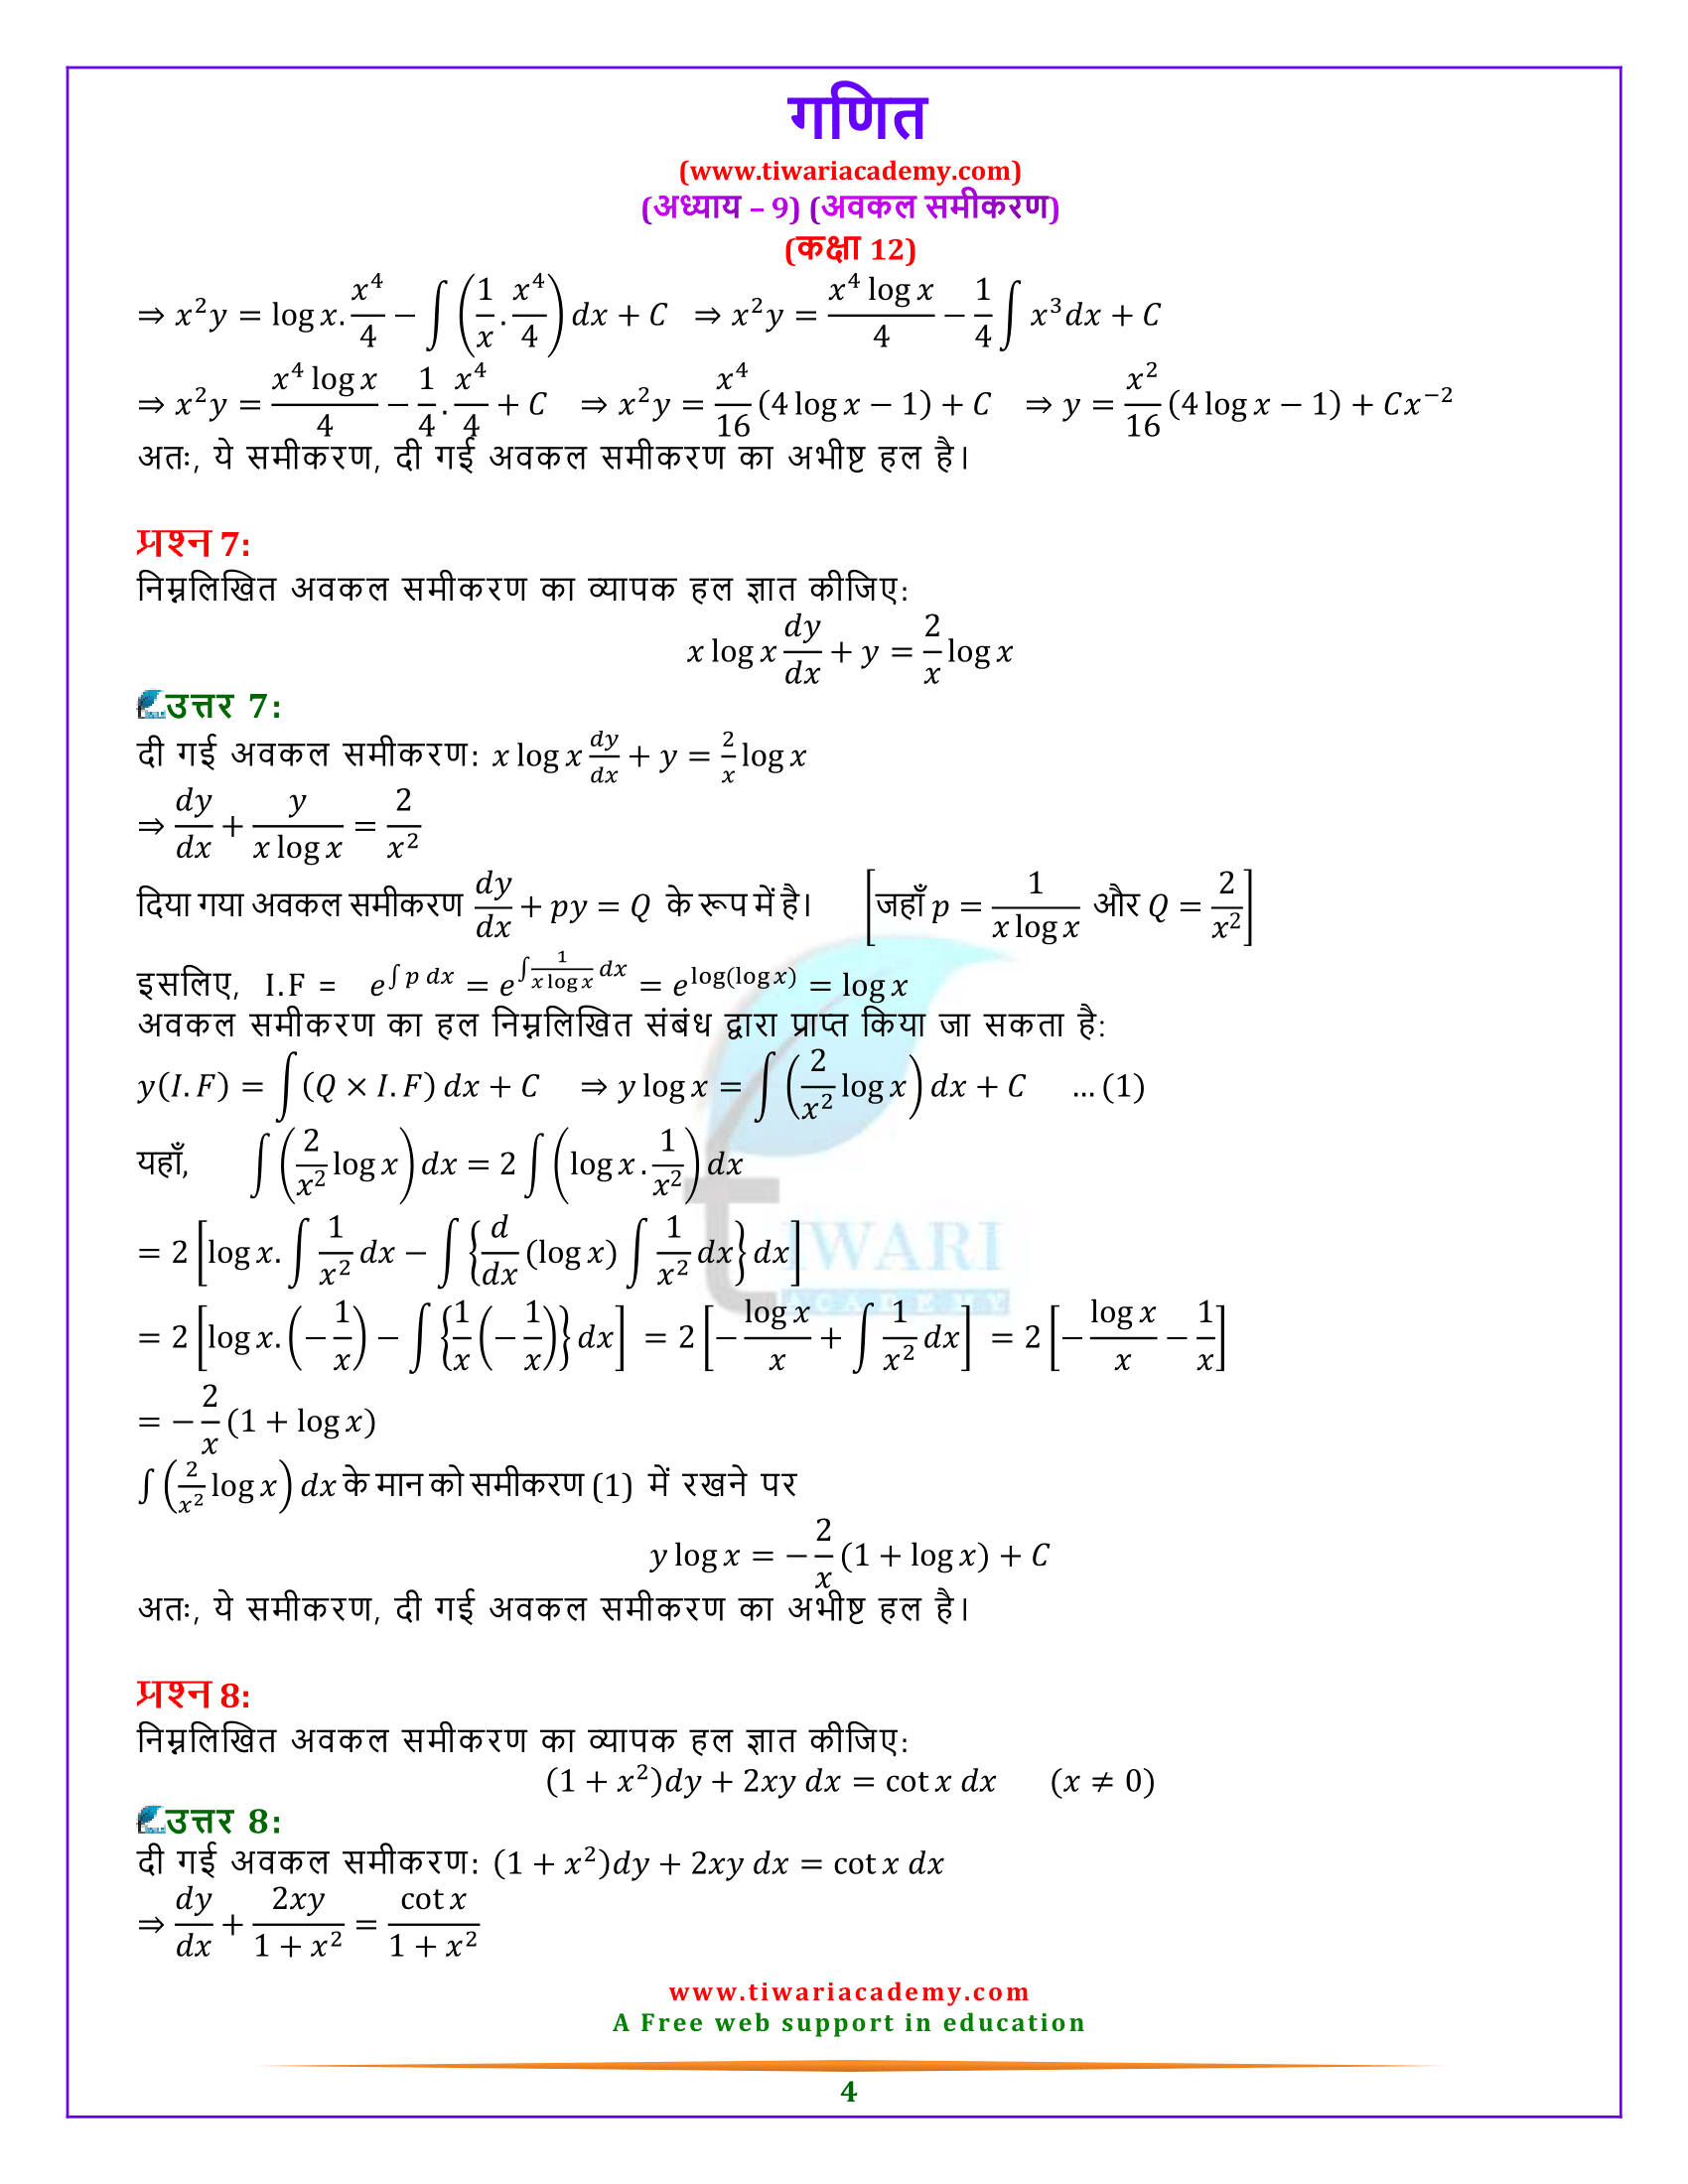 Class 12 Maths Exercise 9.6 Solutions in Hindi Medium PDF